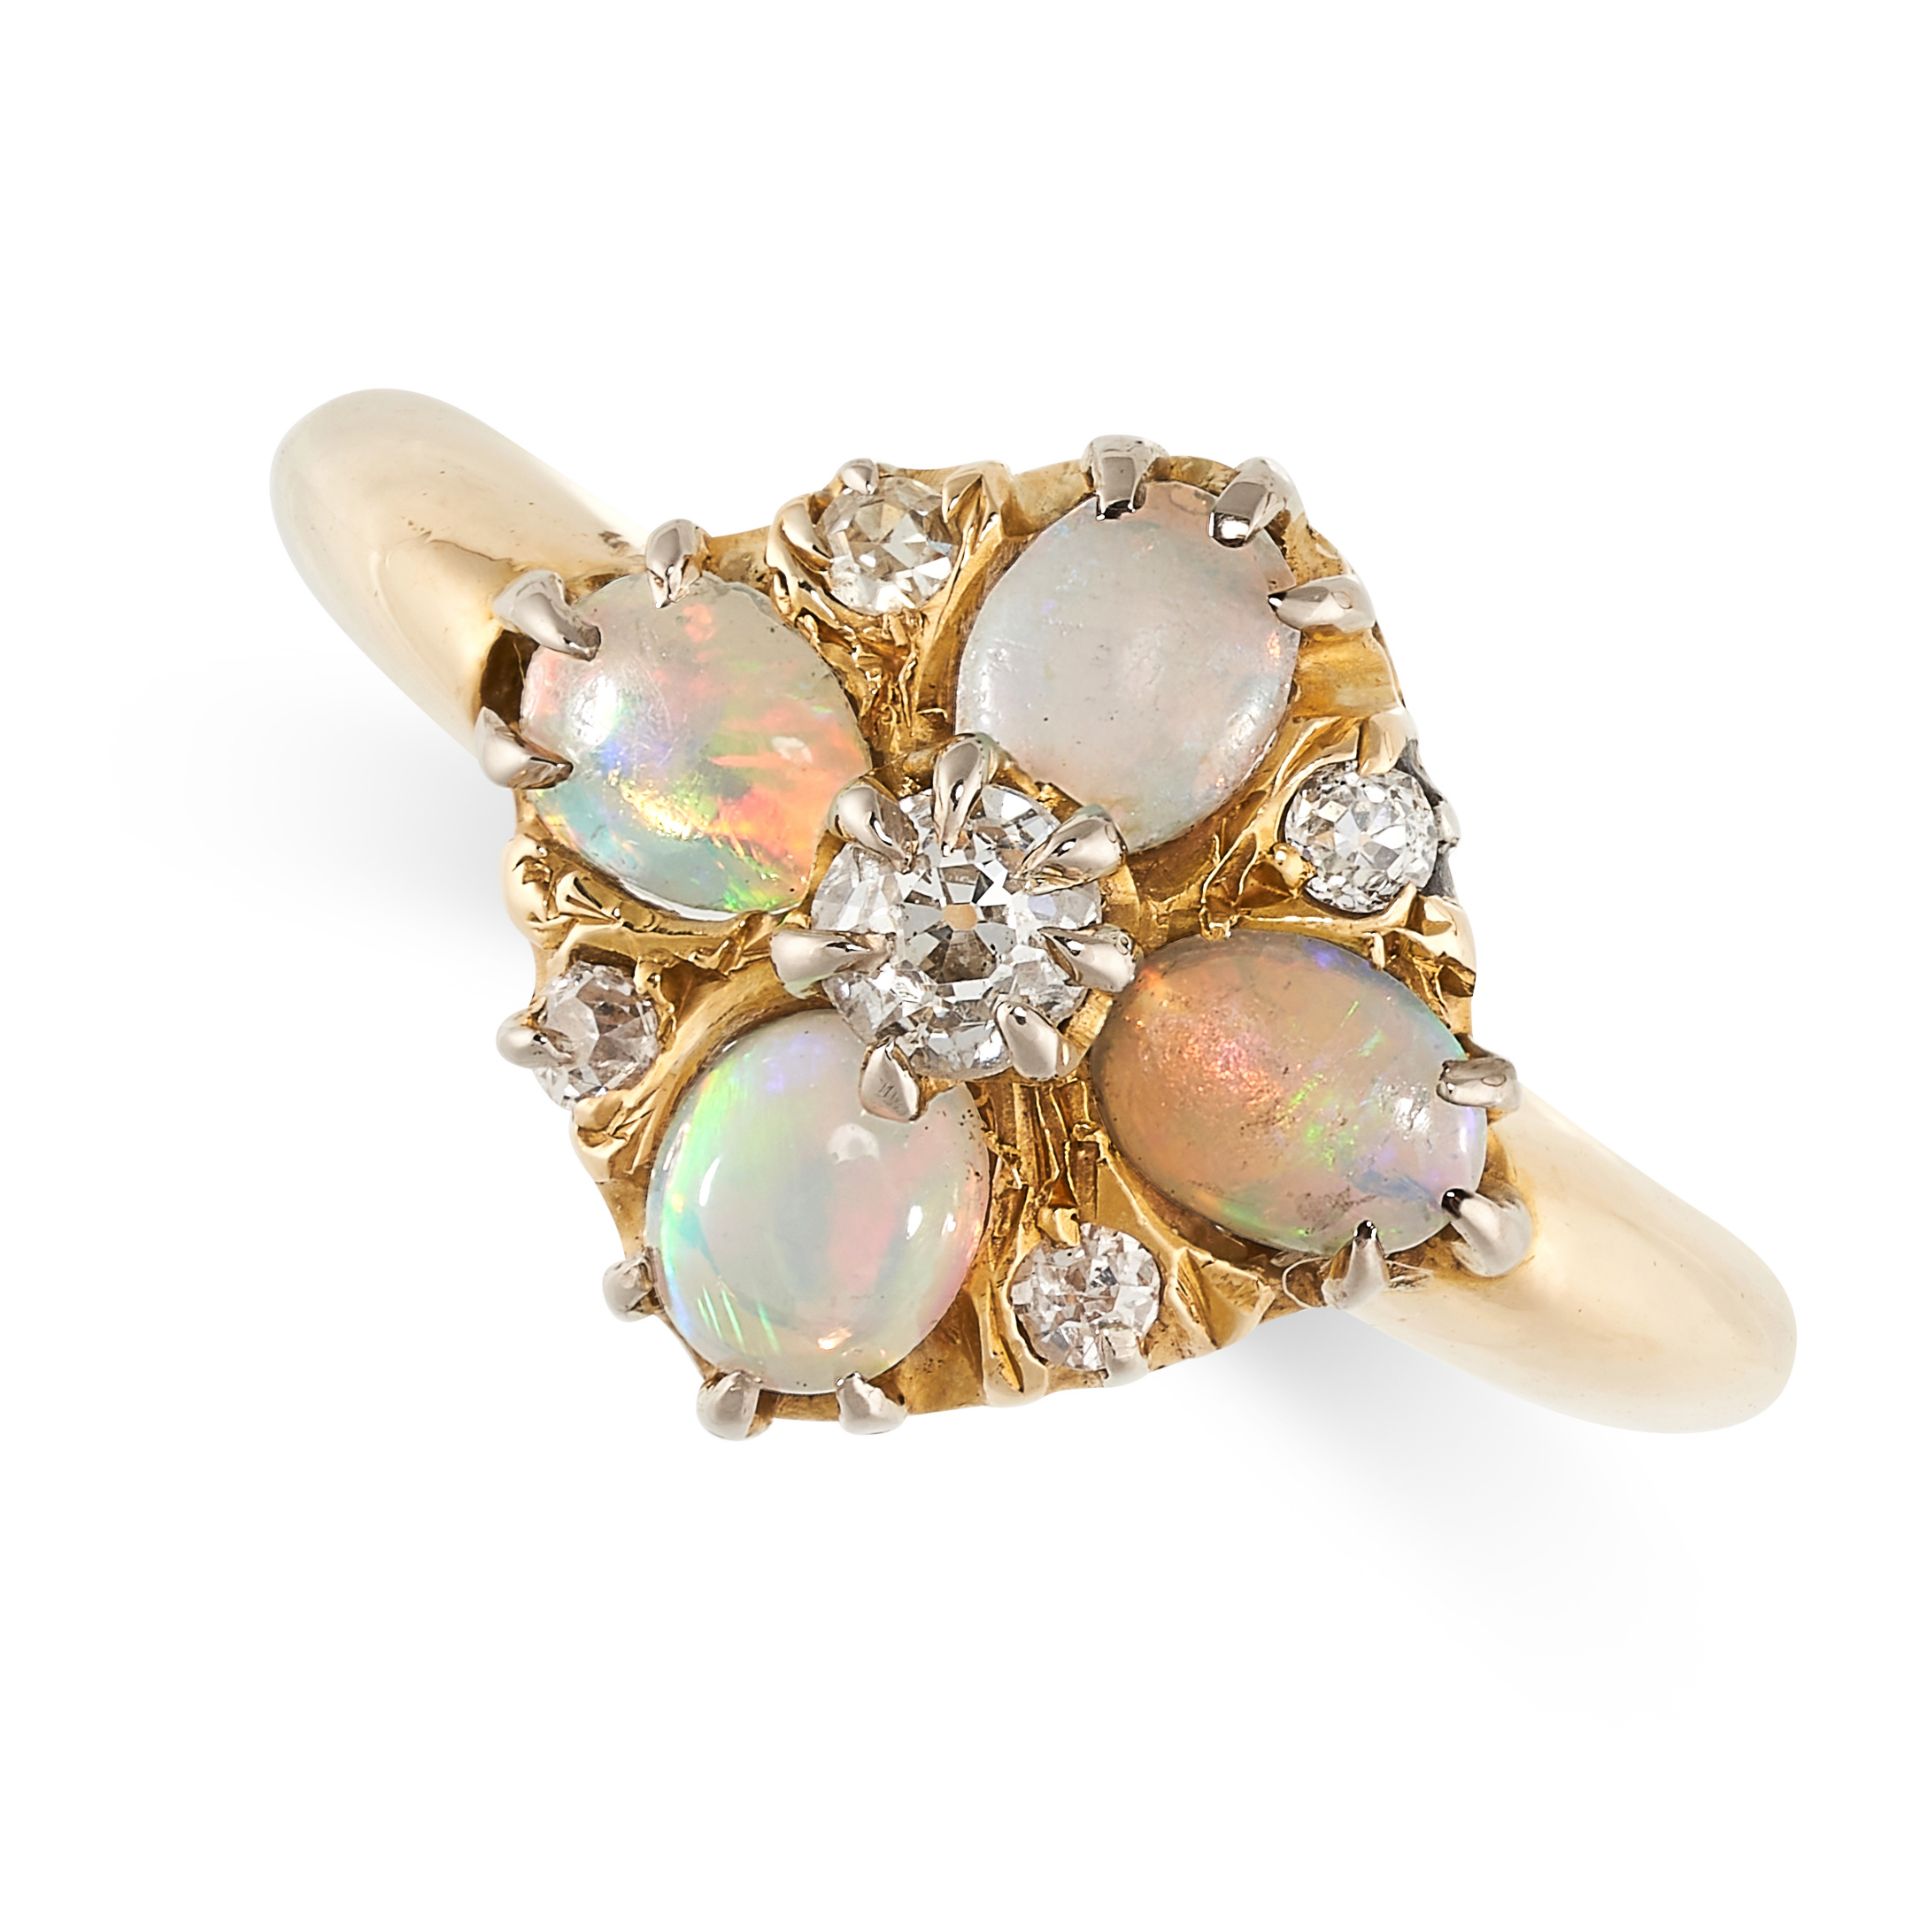 NO RESERVE - AN ANTIQUE OPAL AND DIAMOND DRESS RING in 18ct yellow gold, set with four oval cabochon